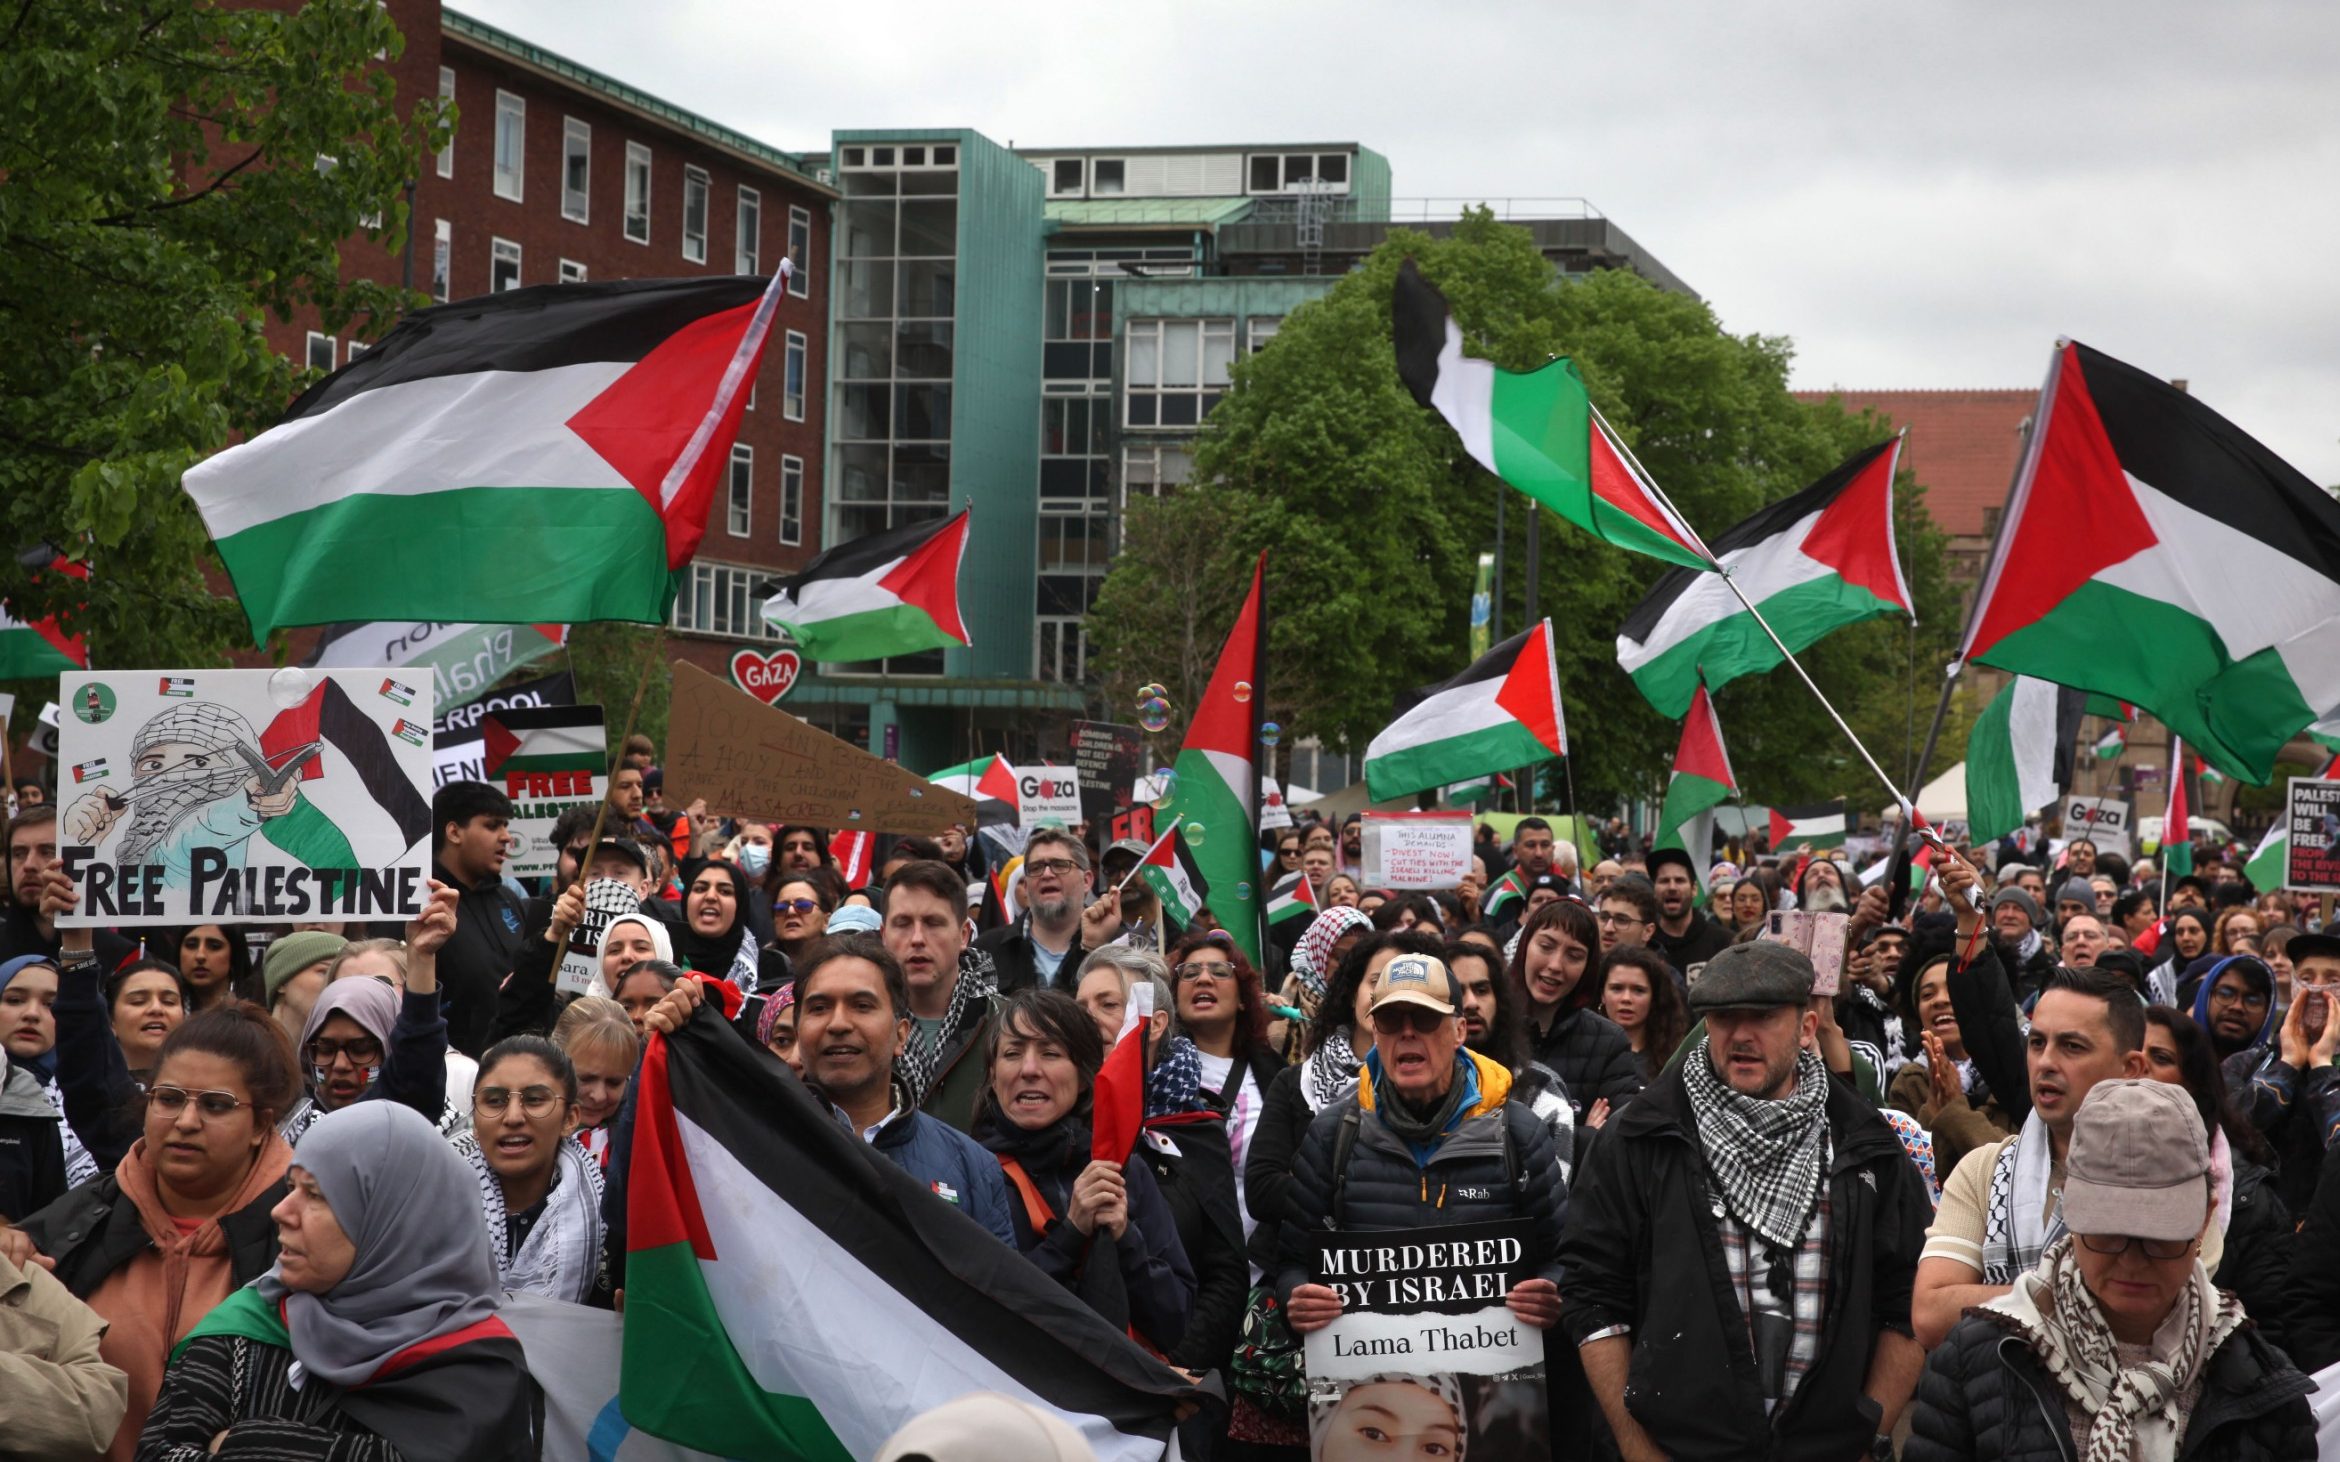 muslim group issues starmer with demands to win back lost votes over gaza